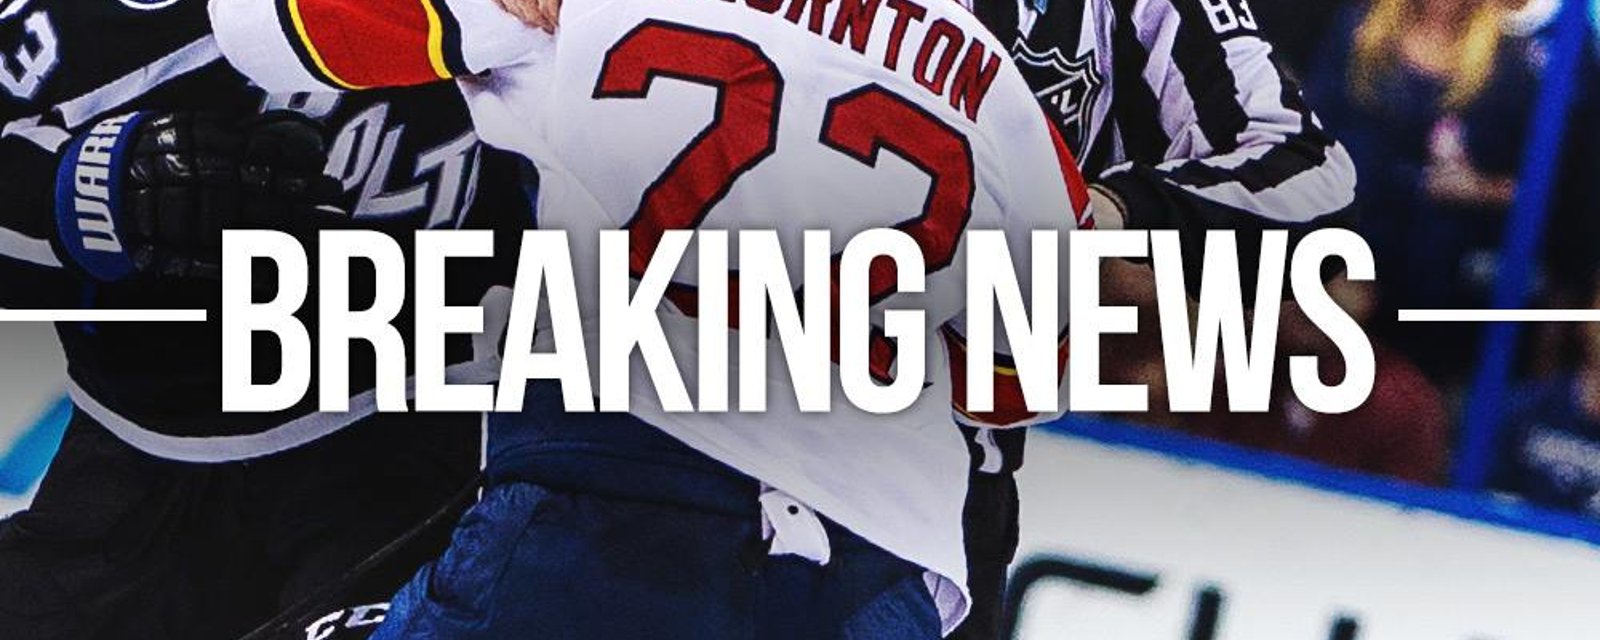 BREAKING: Shawn Thornton publicly DESTROYED a player in after game interview.